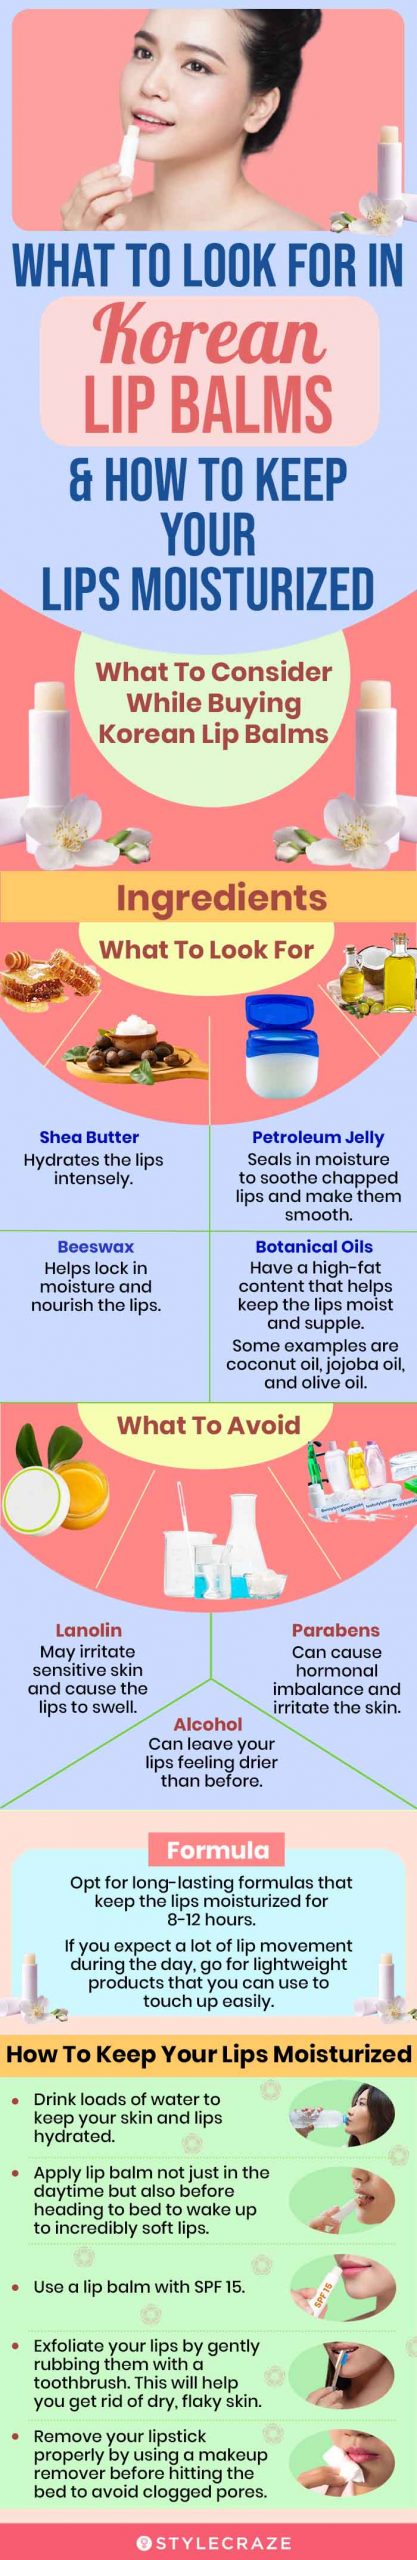 What To Look For In Korean Lip Balms & How To Keep Your Lips Moisturized